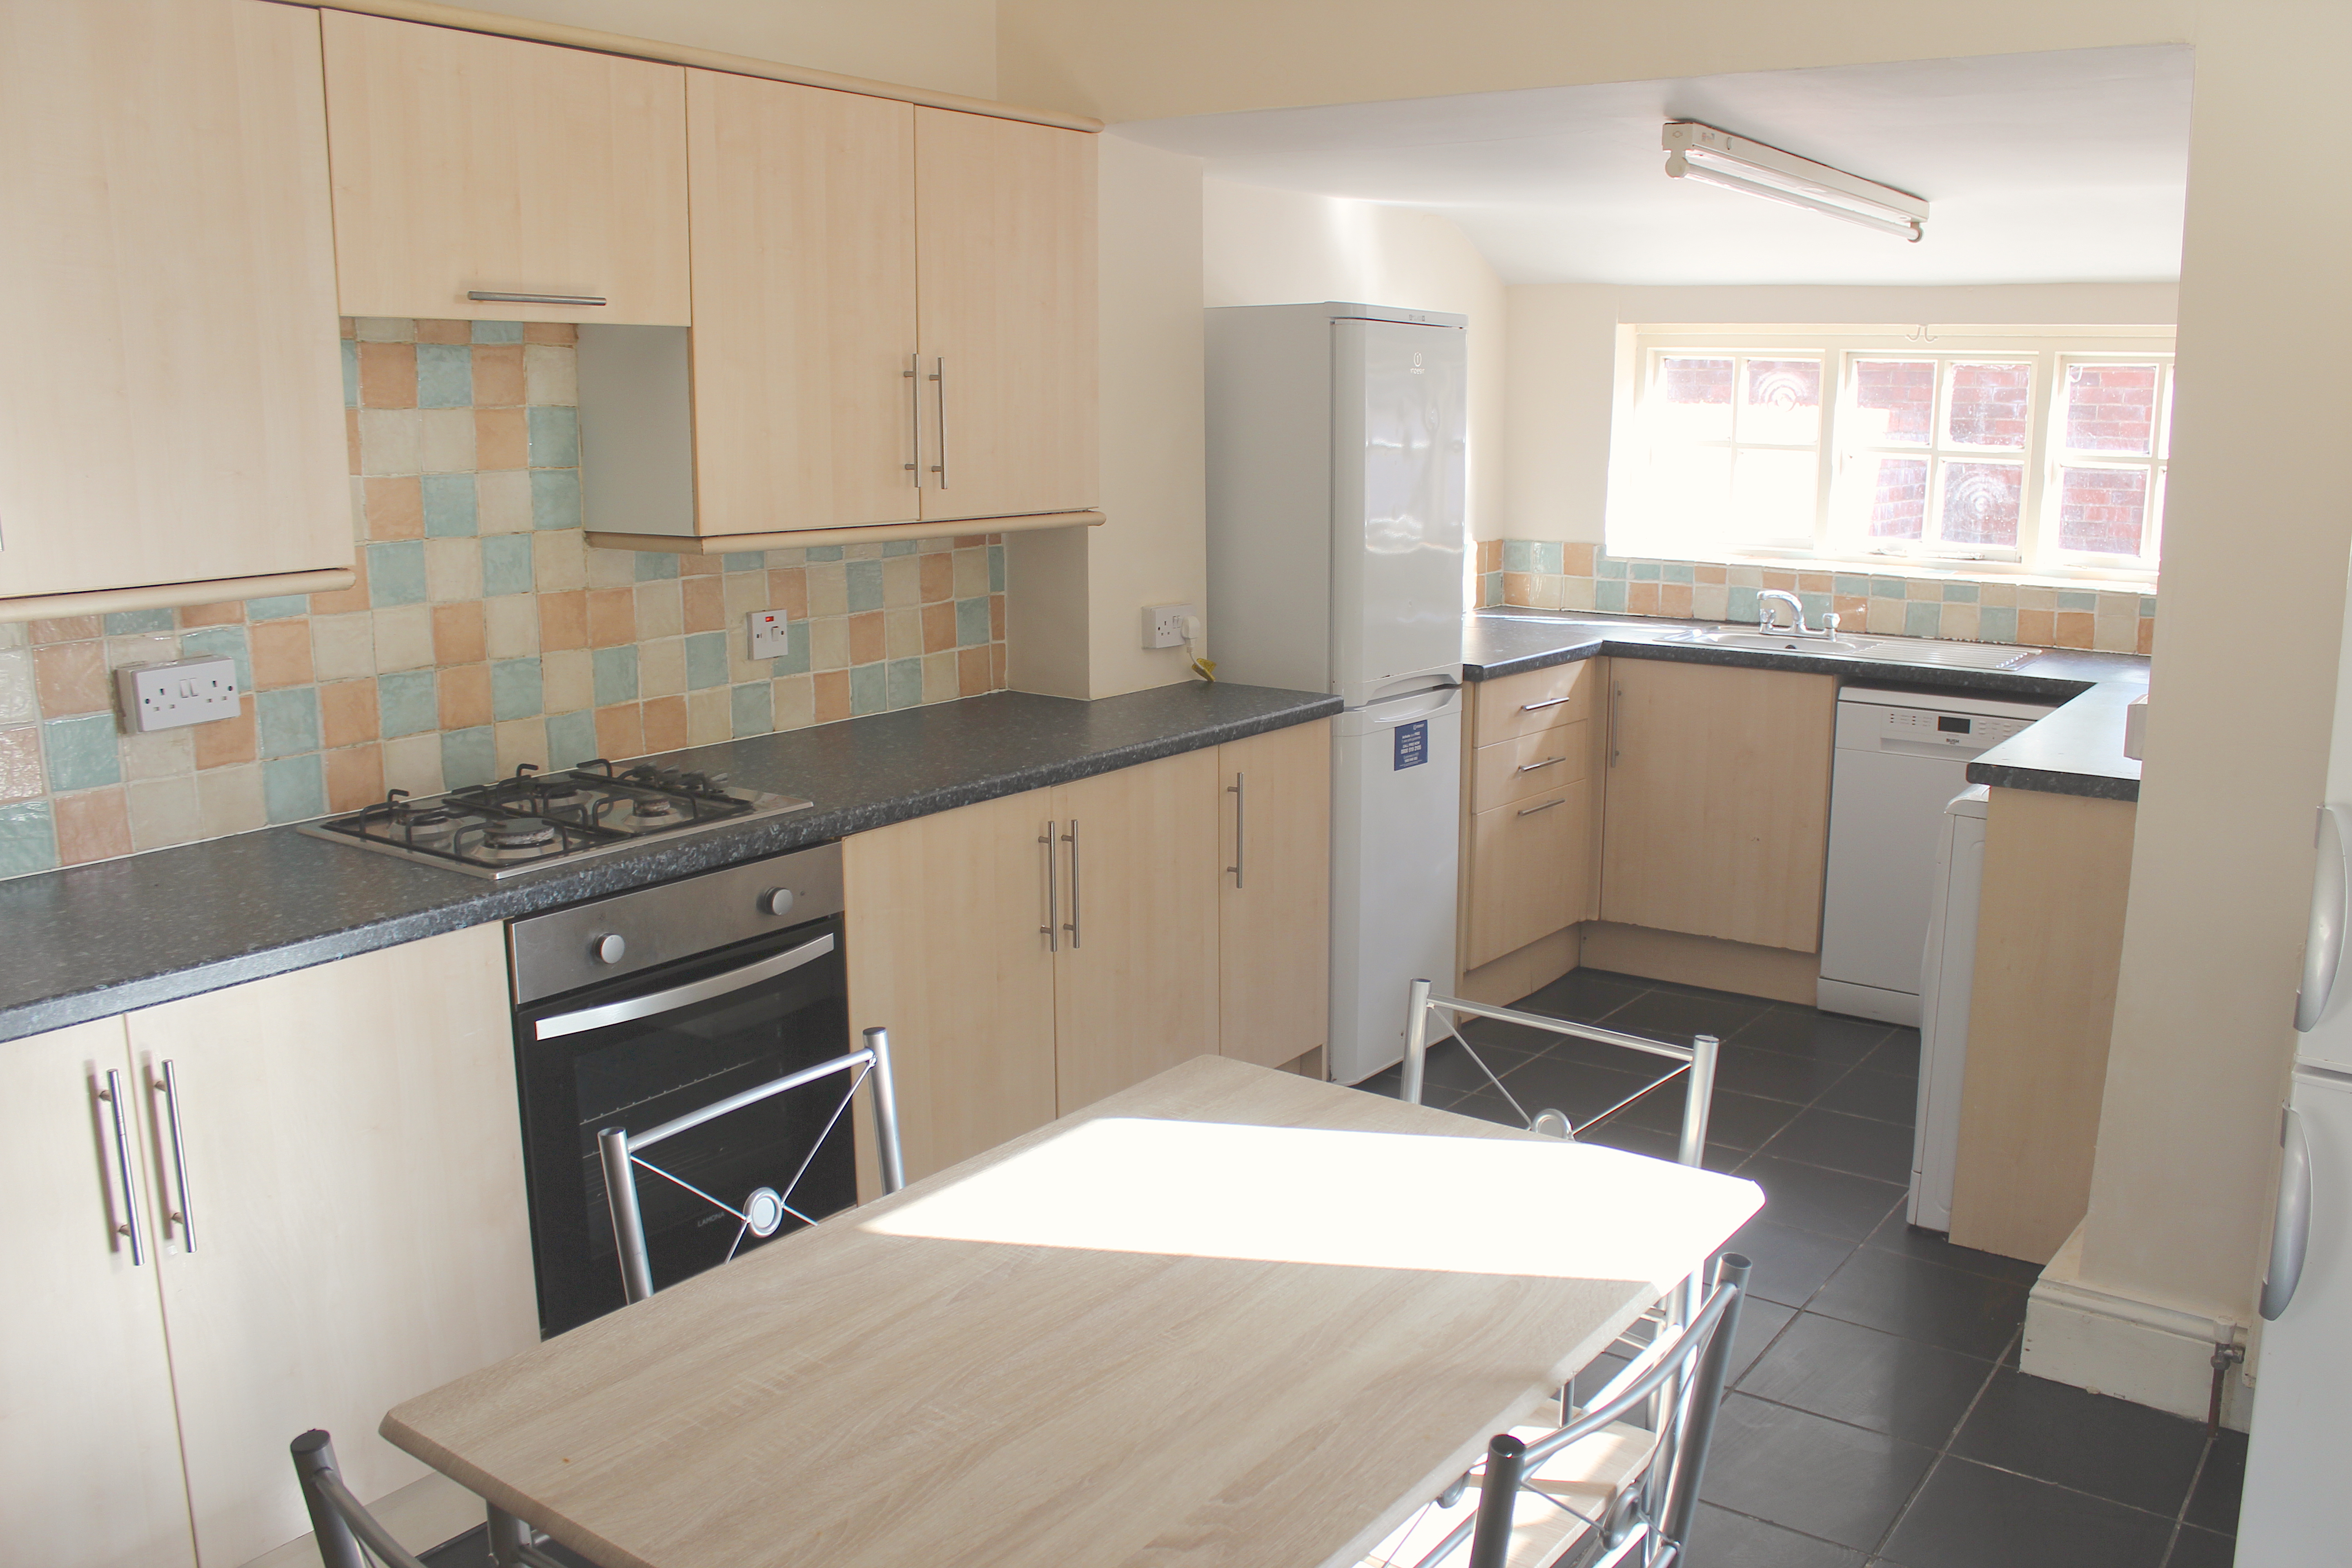 8 Bed Student House, Manor House Road NE2 £150.00 PPPW